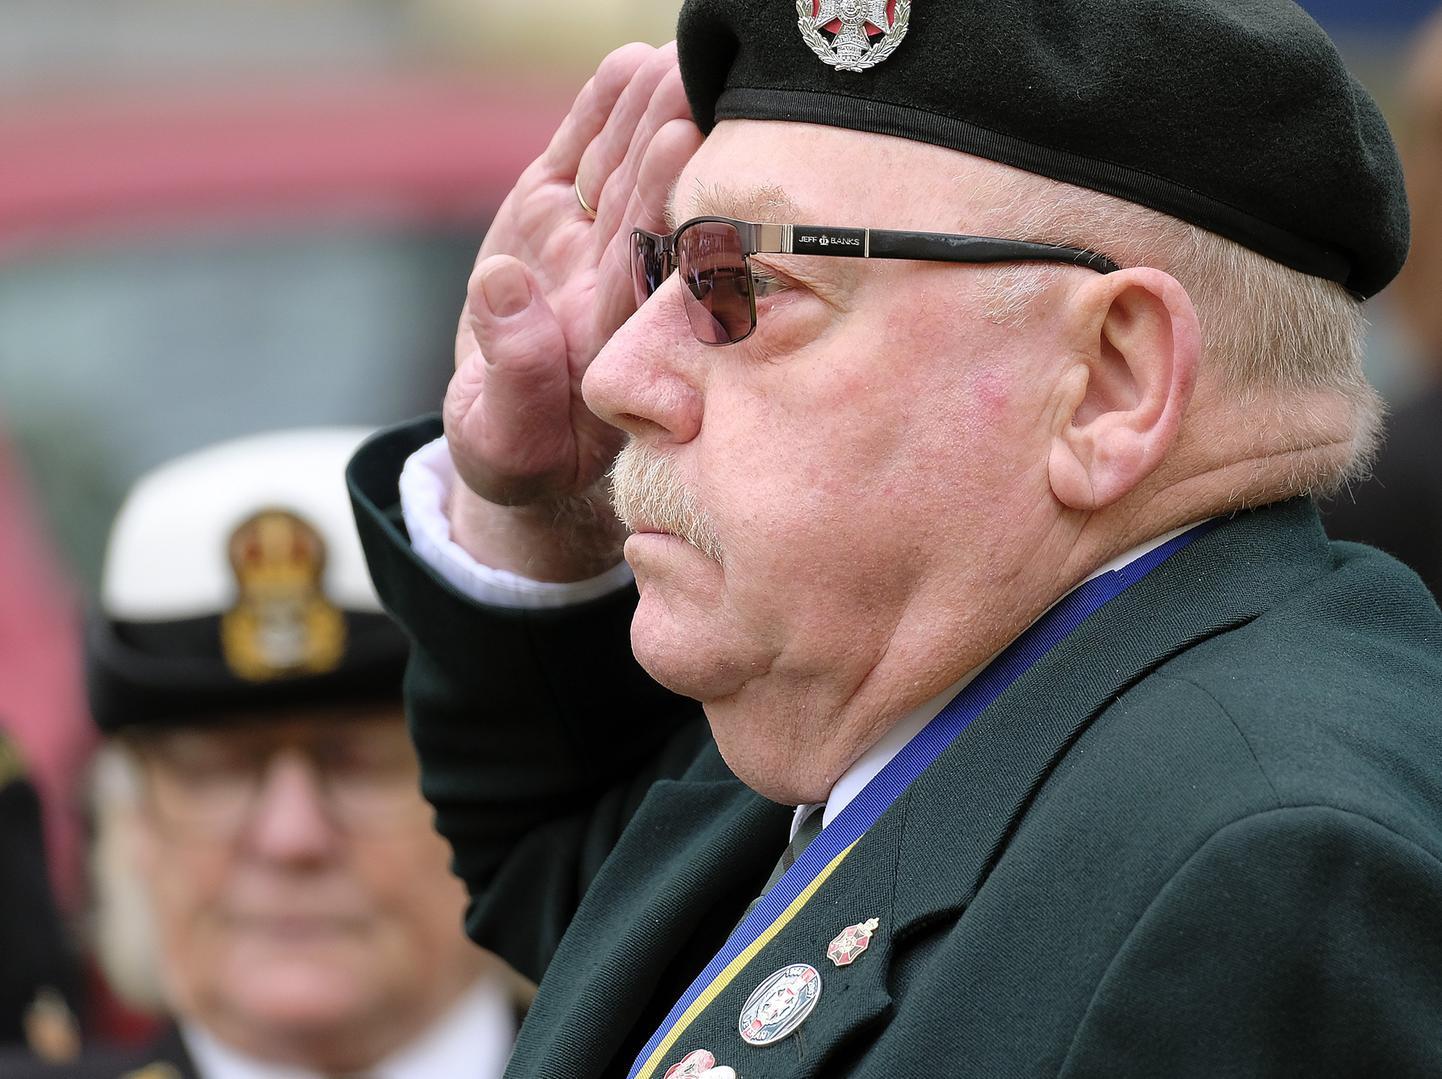 Veterans pay their respects.